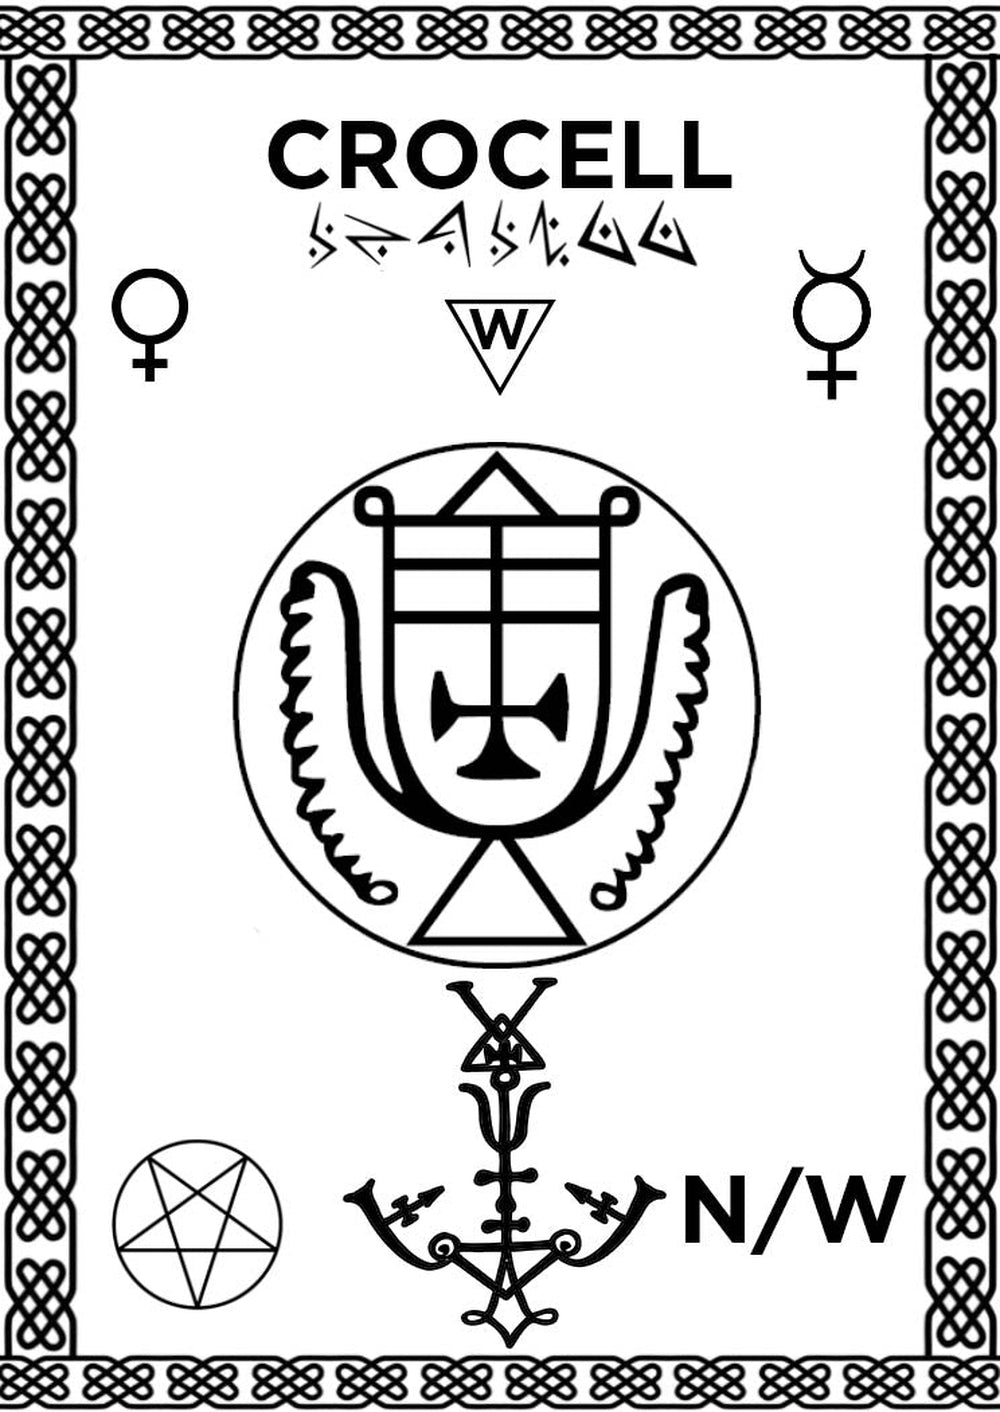 Invocation-Alignment-Pad-with-the-Sigil-of-Crocell-for-home-alter-Witchcraft-2